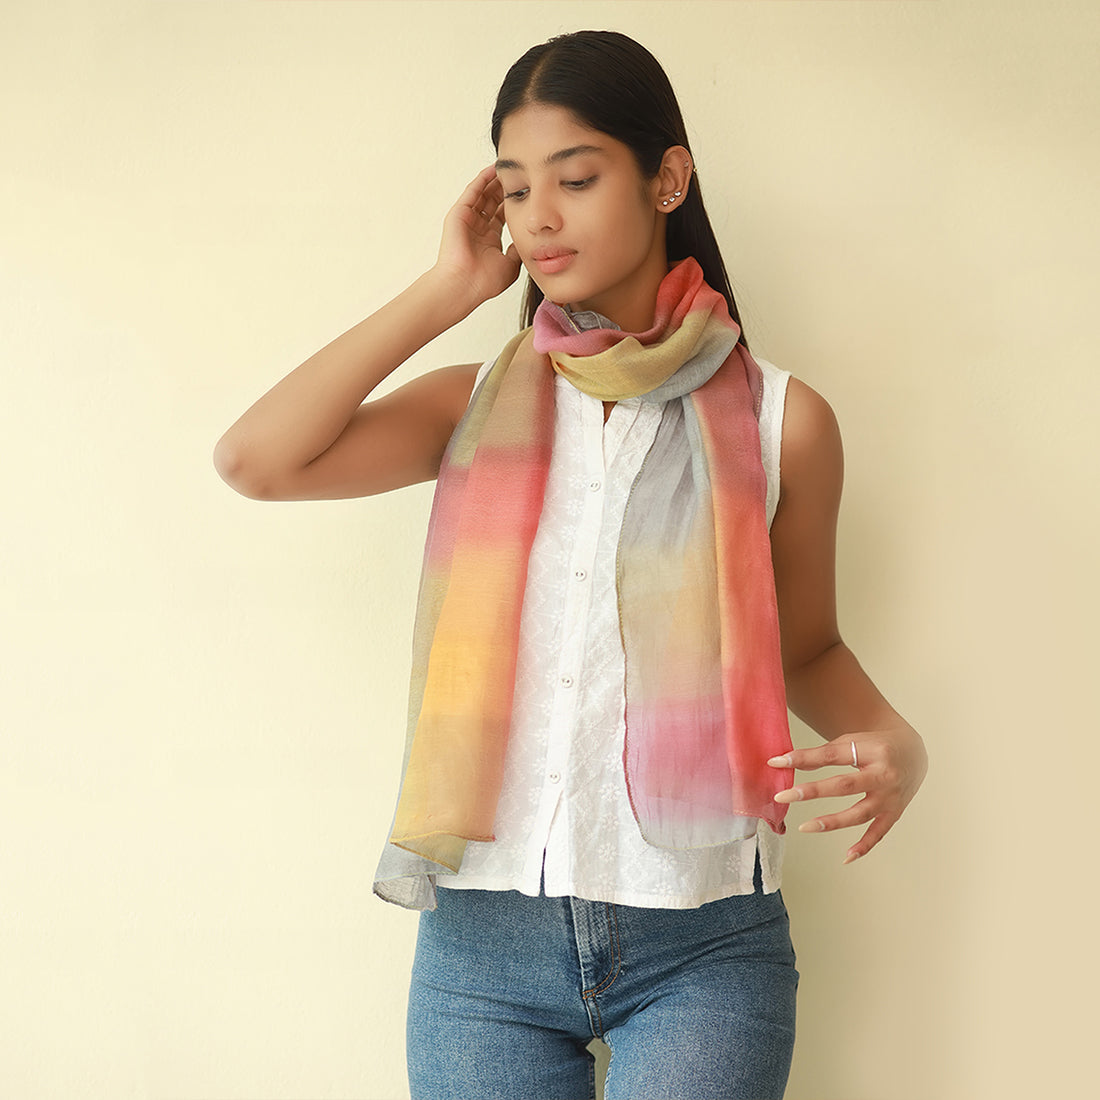 Shades of Yellow, Orange & Grey Ombre Patches Silk-Cotton Blend Crinkle Effect Scarf